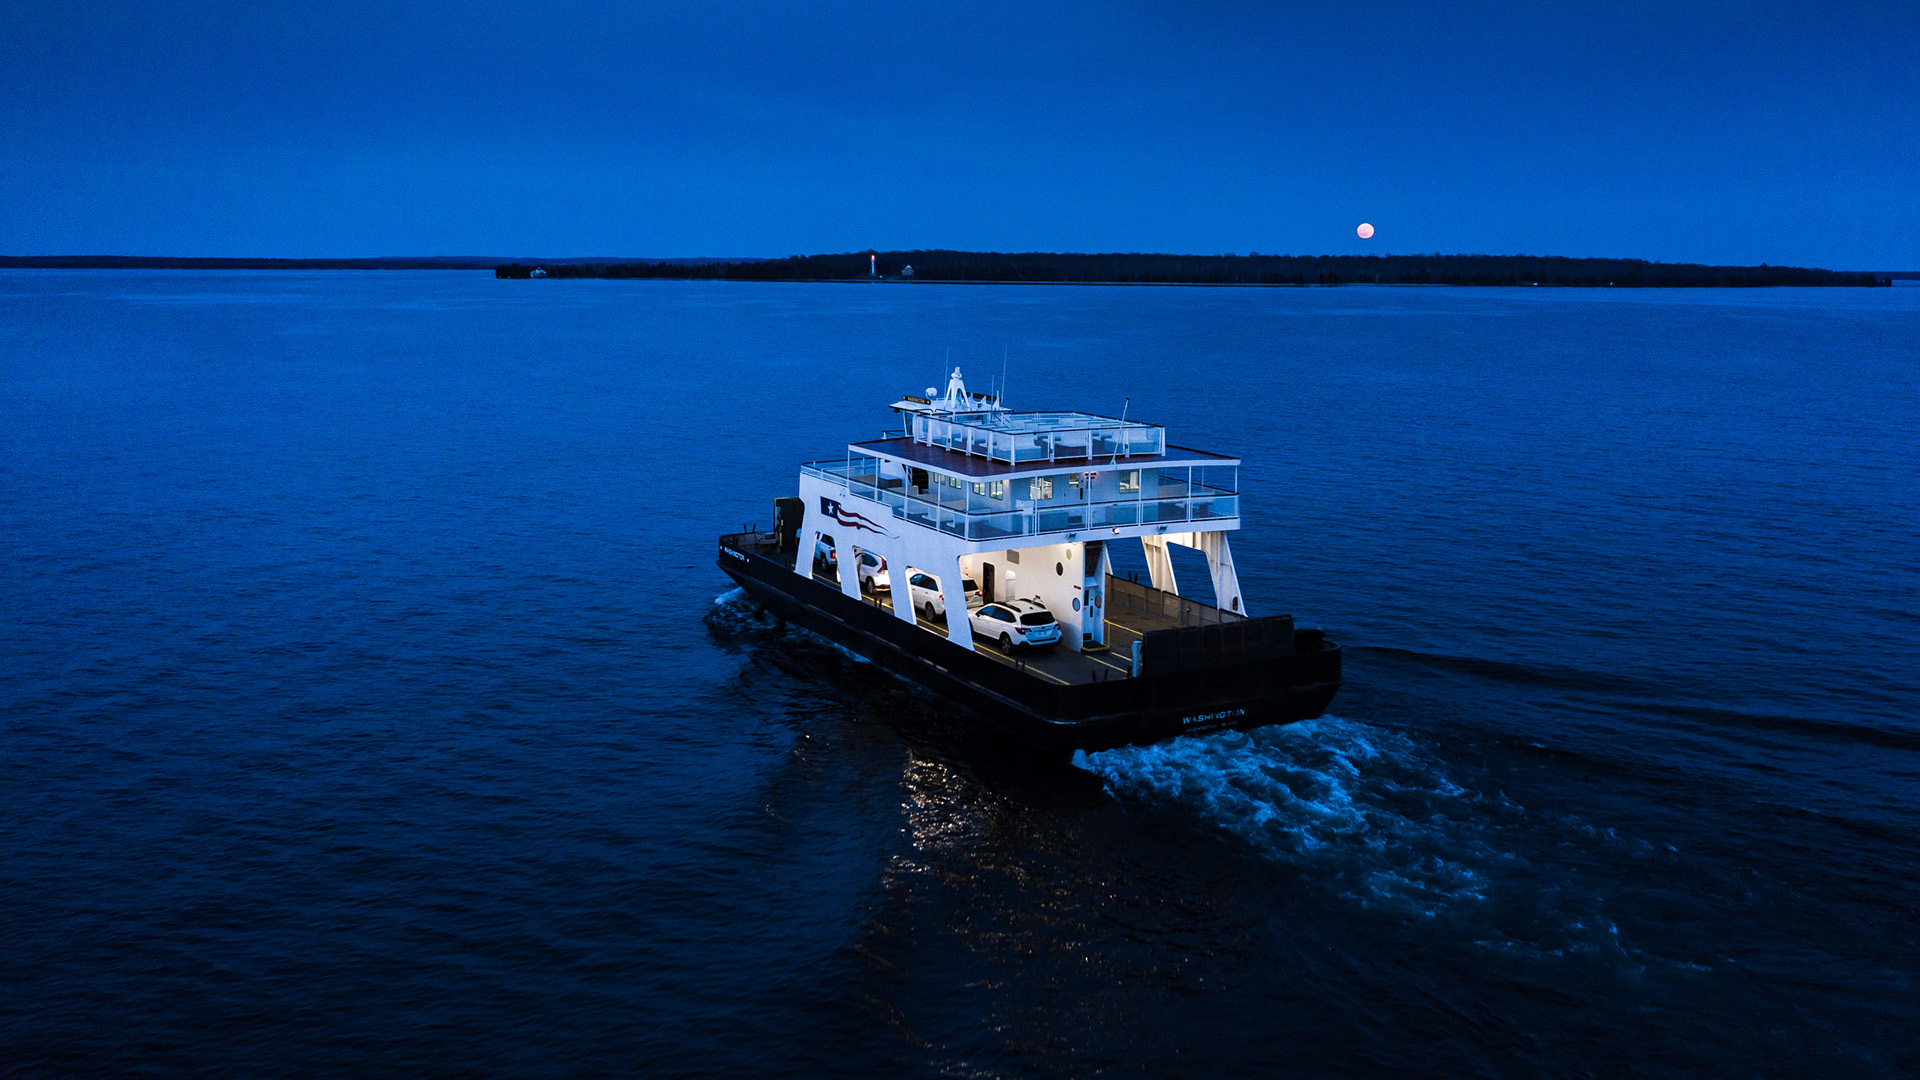 A ferry carrying cars travels across water in the evening with a moonrise visible over trees on a shoreline in the distance.